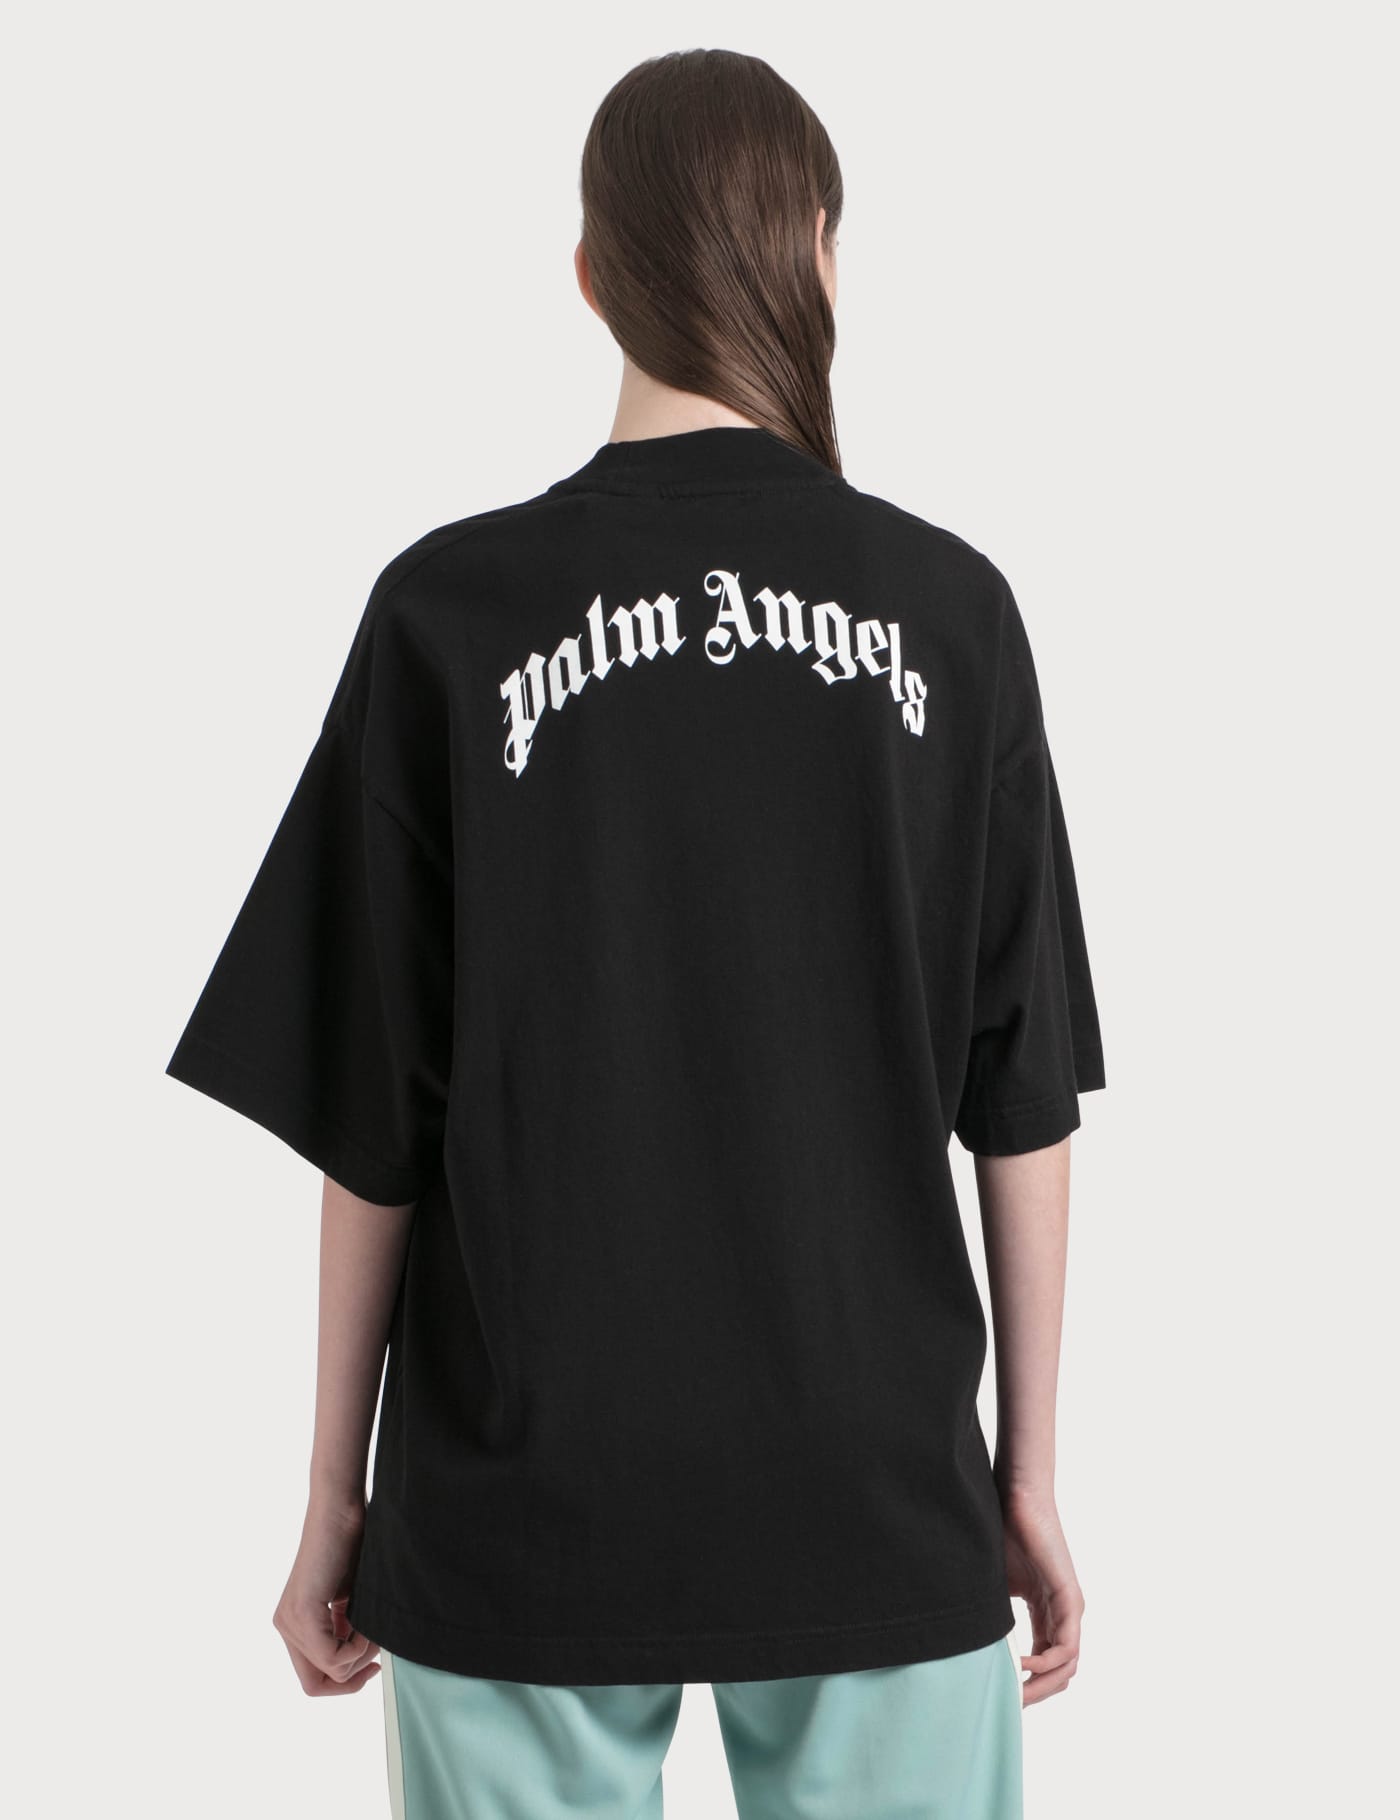 palm angels all over t shirt